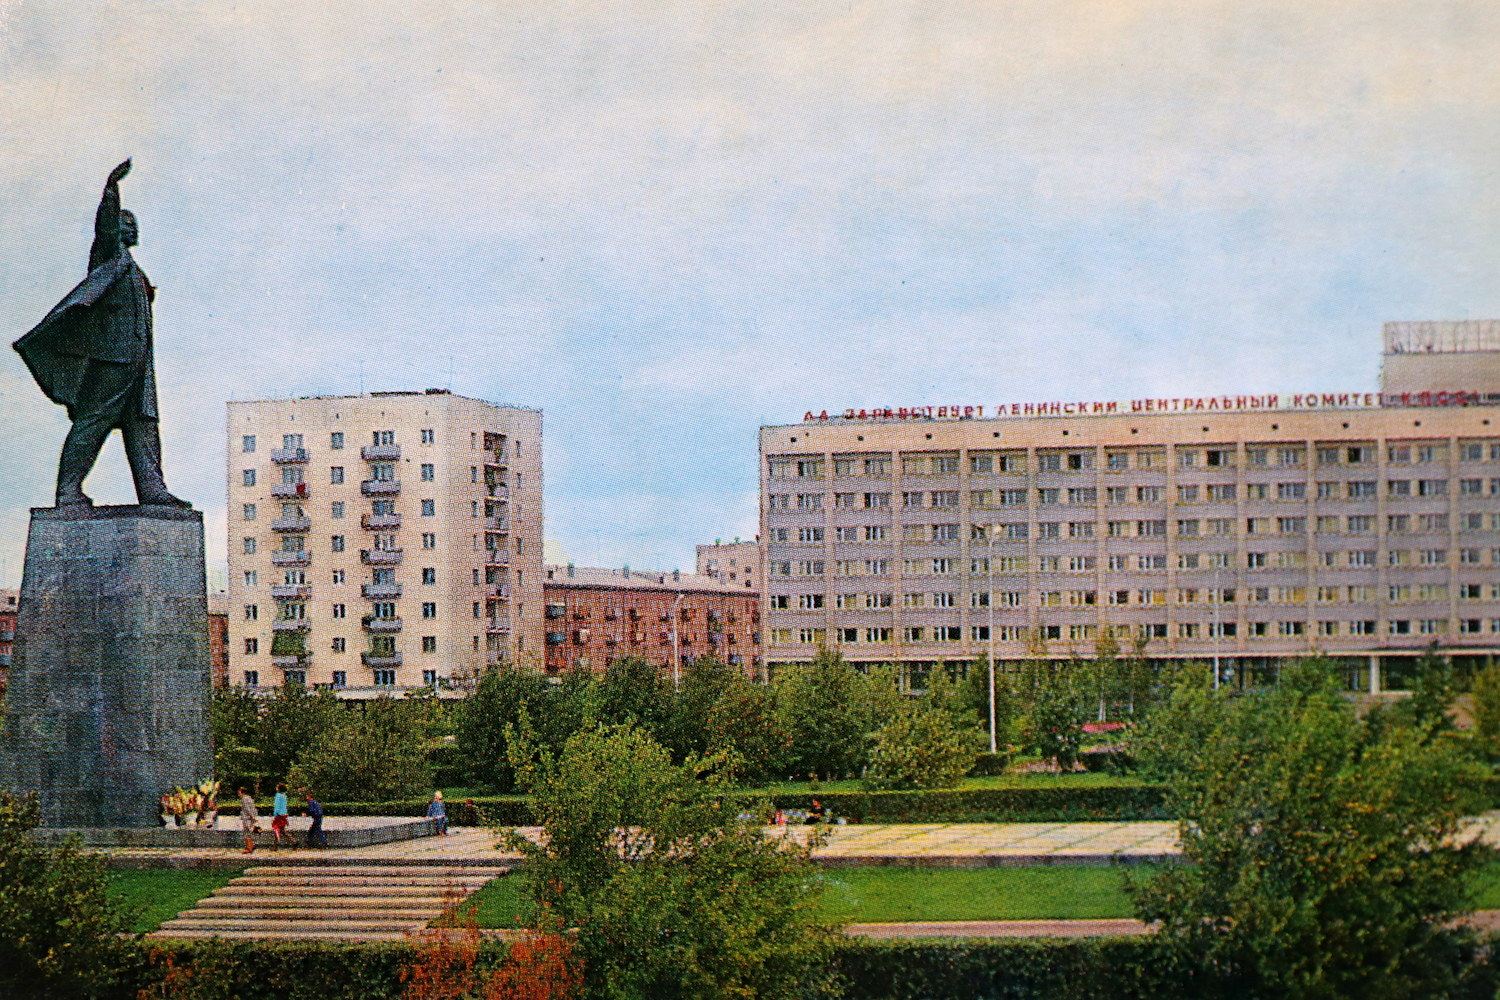 A Soviet postcard from the city of Ufa